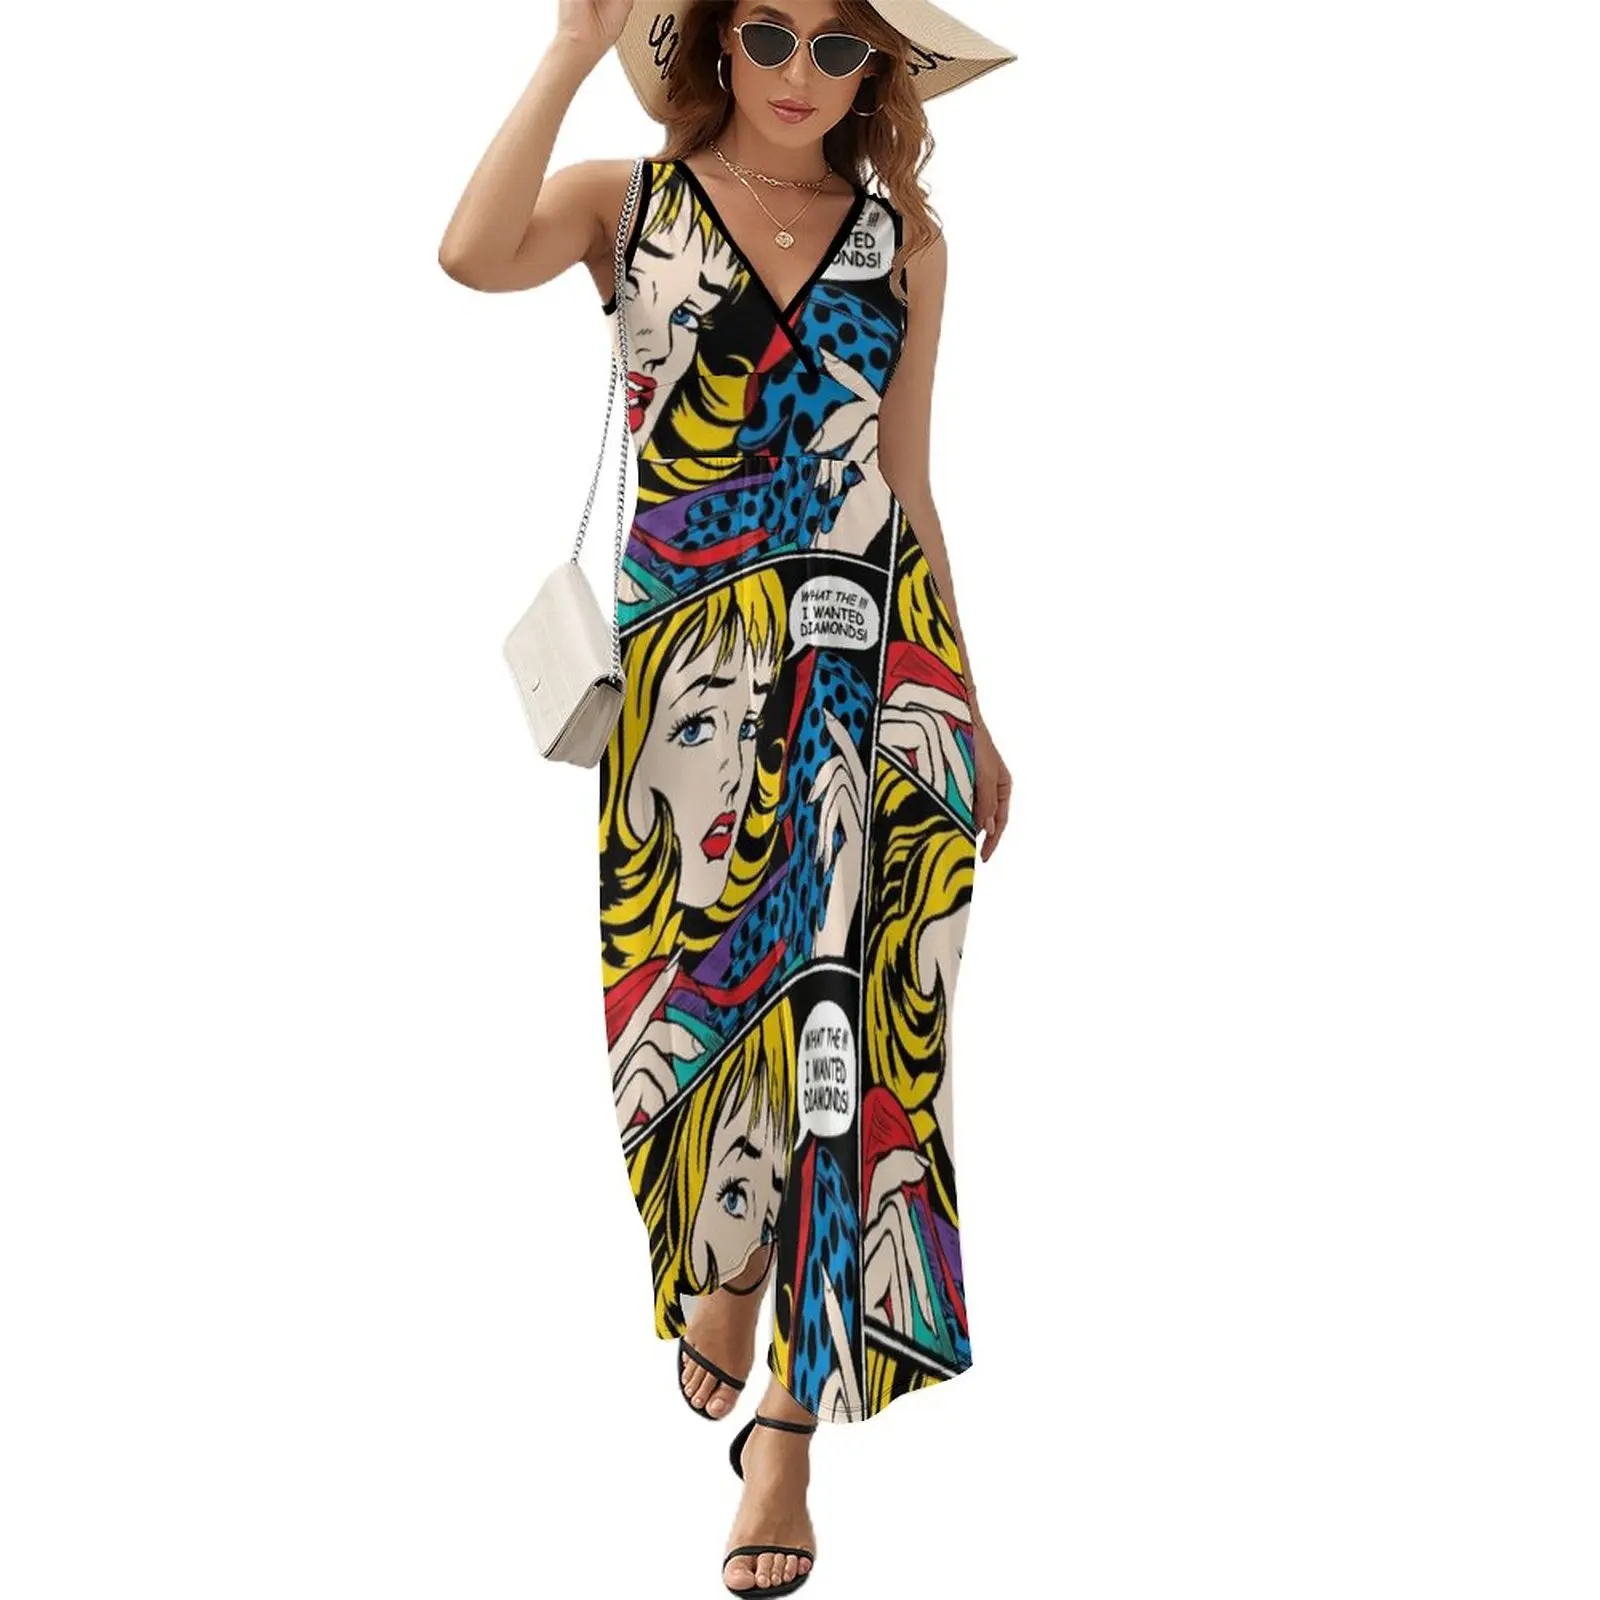 

Pop Art - 'What the !!! I wanted Diamonds' Sleeveless Dress ladies dresses for special occasions women dress summer dress